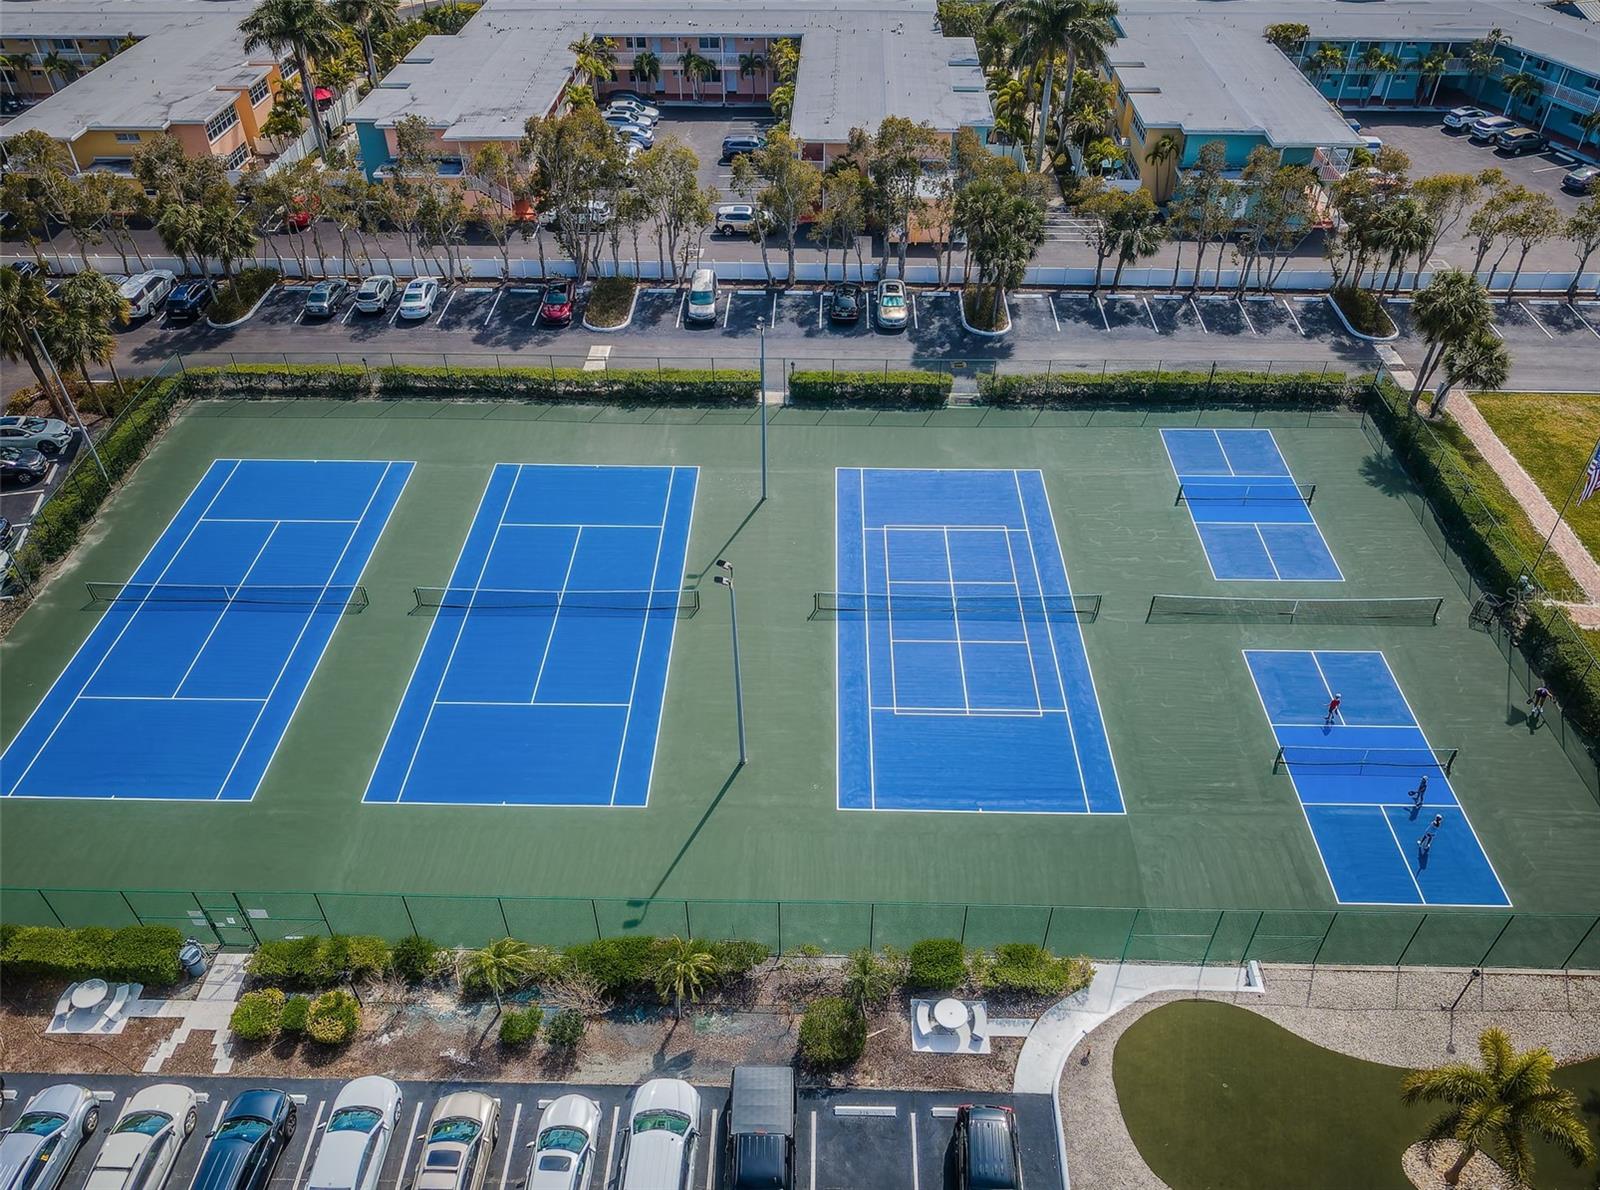 The NEW Tennis and Pickle Ball Courts